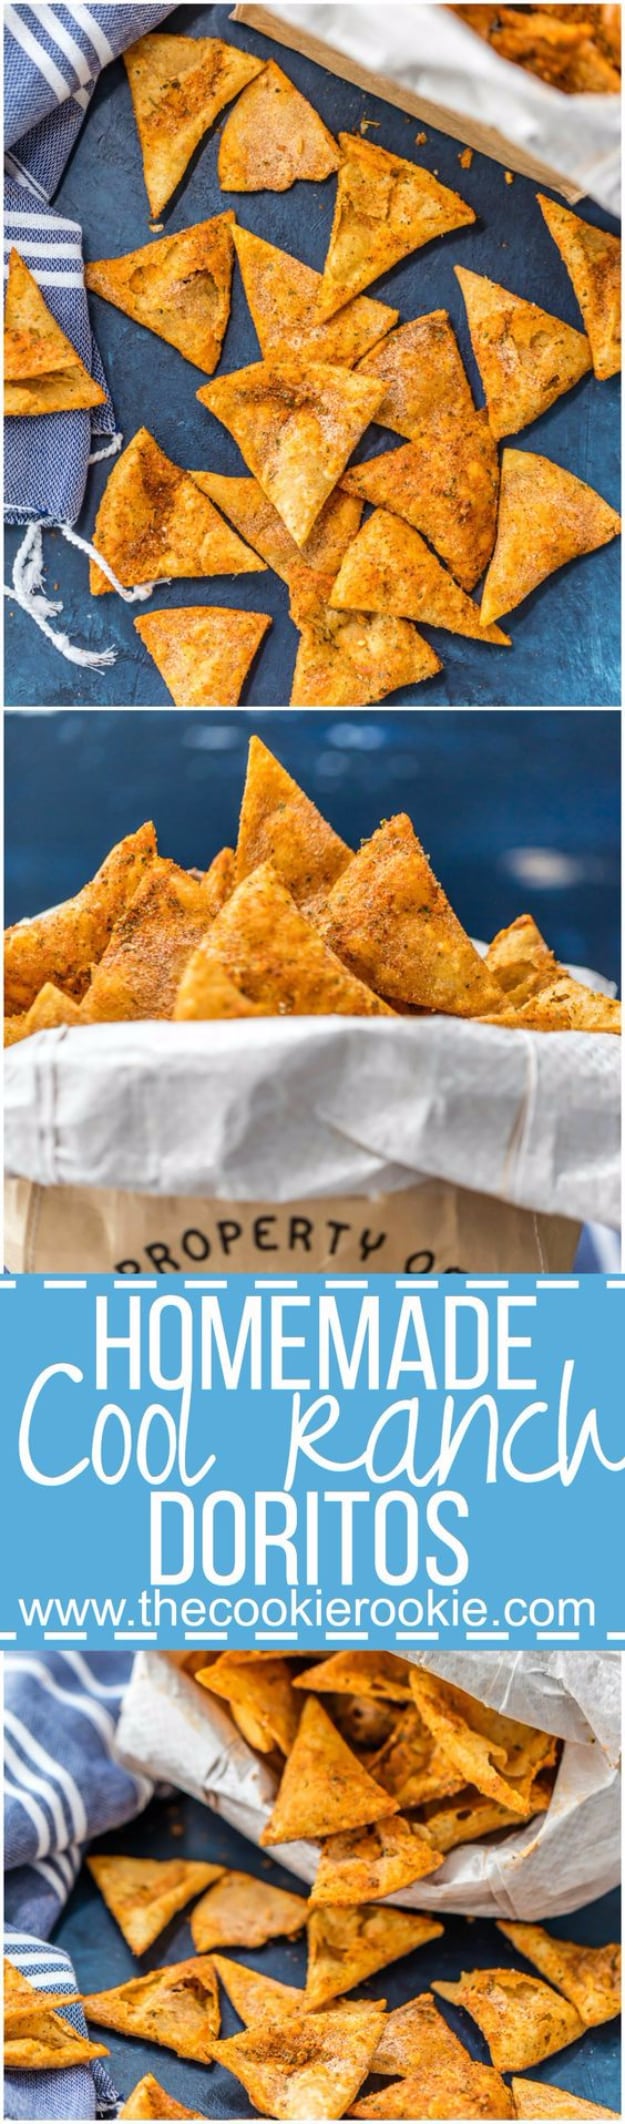  Best Copycat Recipes From Top Restaurants - Homemade Cool Ranch Doritos - Awesome Recipe Knockoffs and Recipe Ideas from Chipotle Restaurant, Starbucks, Olive Garden, Cinabbon, Cracker Barrel, Taco Bell, Cheesecake Factory, KFC, Mc Donalds, Red Lobster, Panda Express #recipes #copycat #dinnerideas 